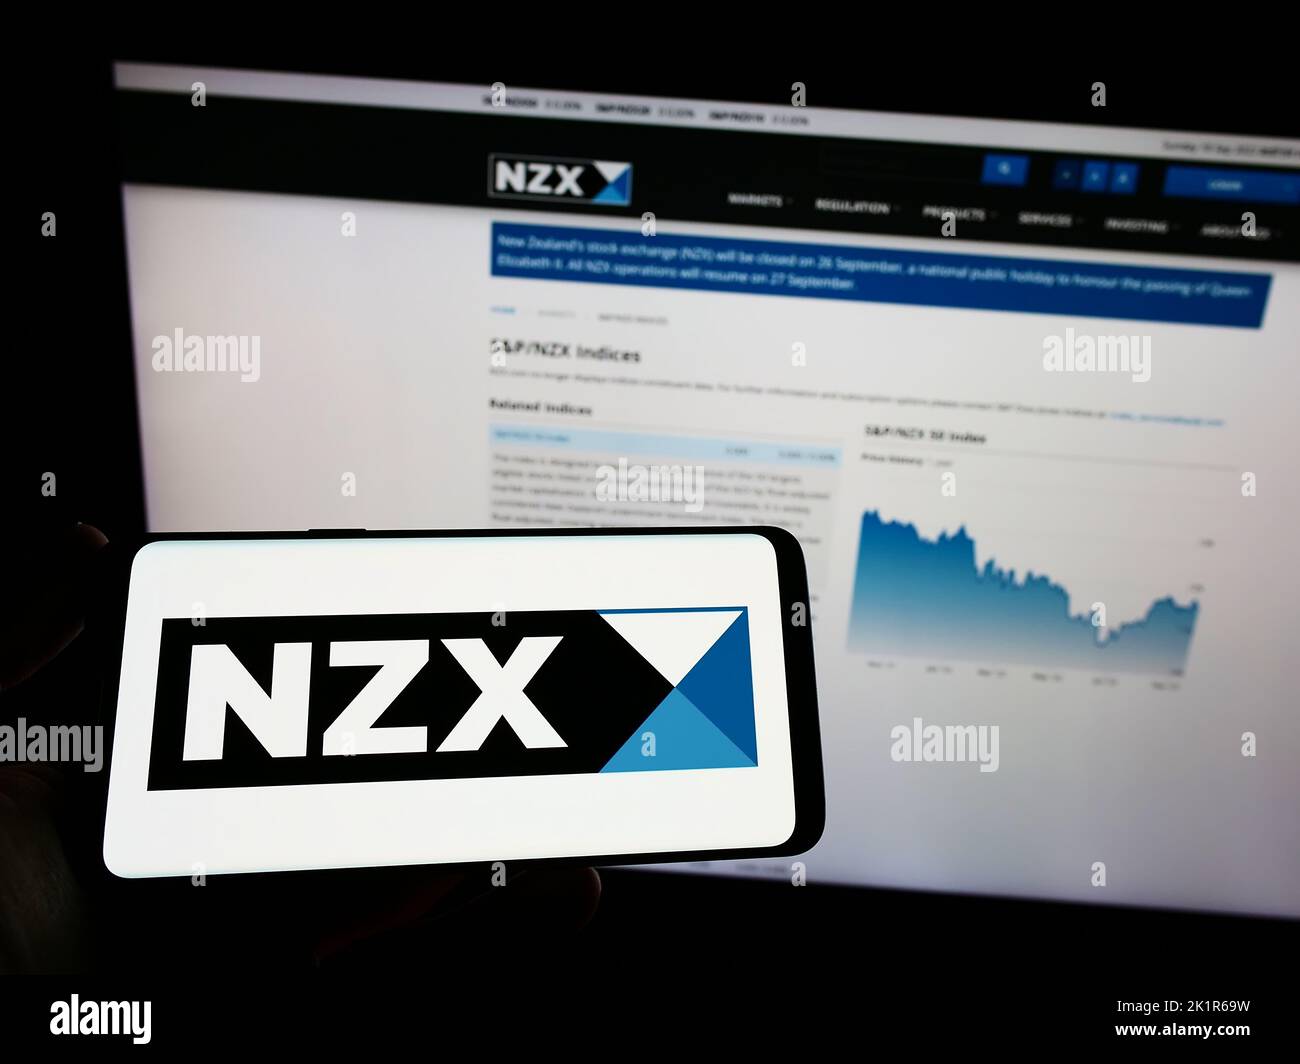 Person holding mobile phone with logo of financial company New Zealand's Exchange (NZX) on screen in front of web page. Focus on phone display. Stock Photo